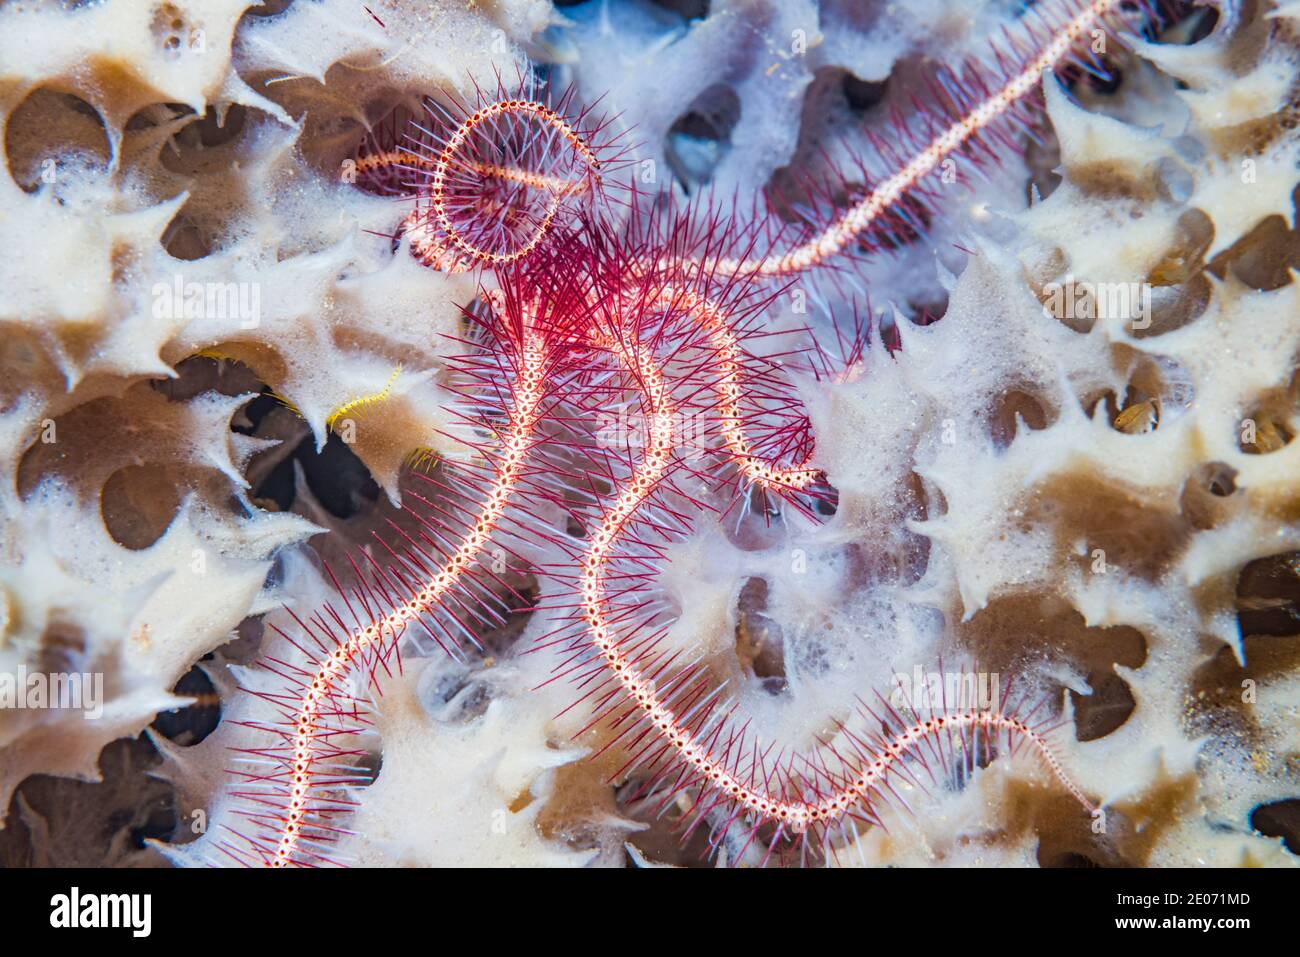 Dark red-spined brittle star [Ophiothrix purpurea] on a sponge.  Lembeh Strait, North Sulawesi, Indonesia. Stock Photo